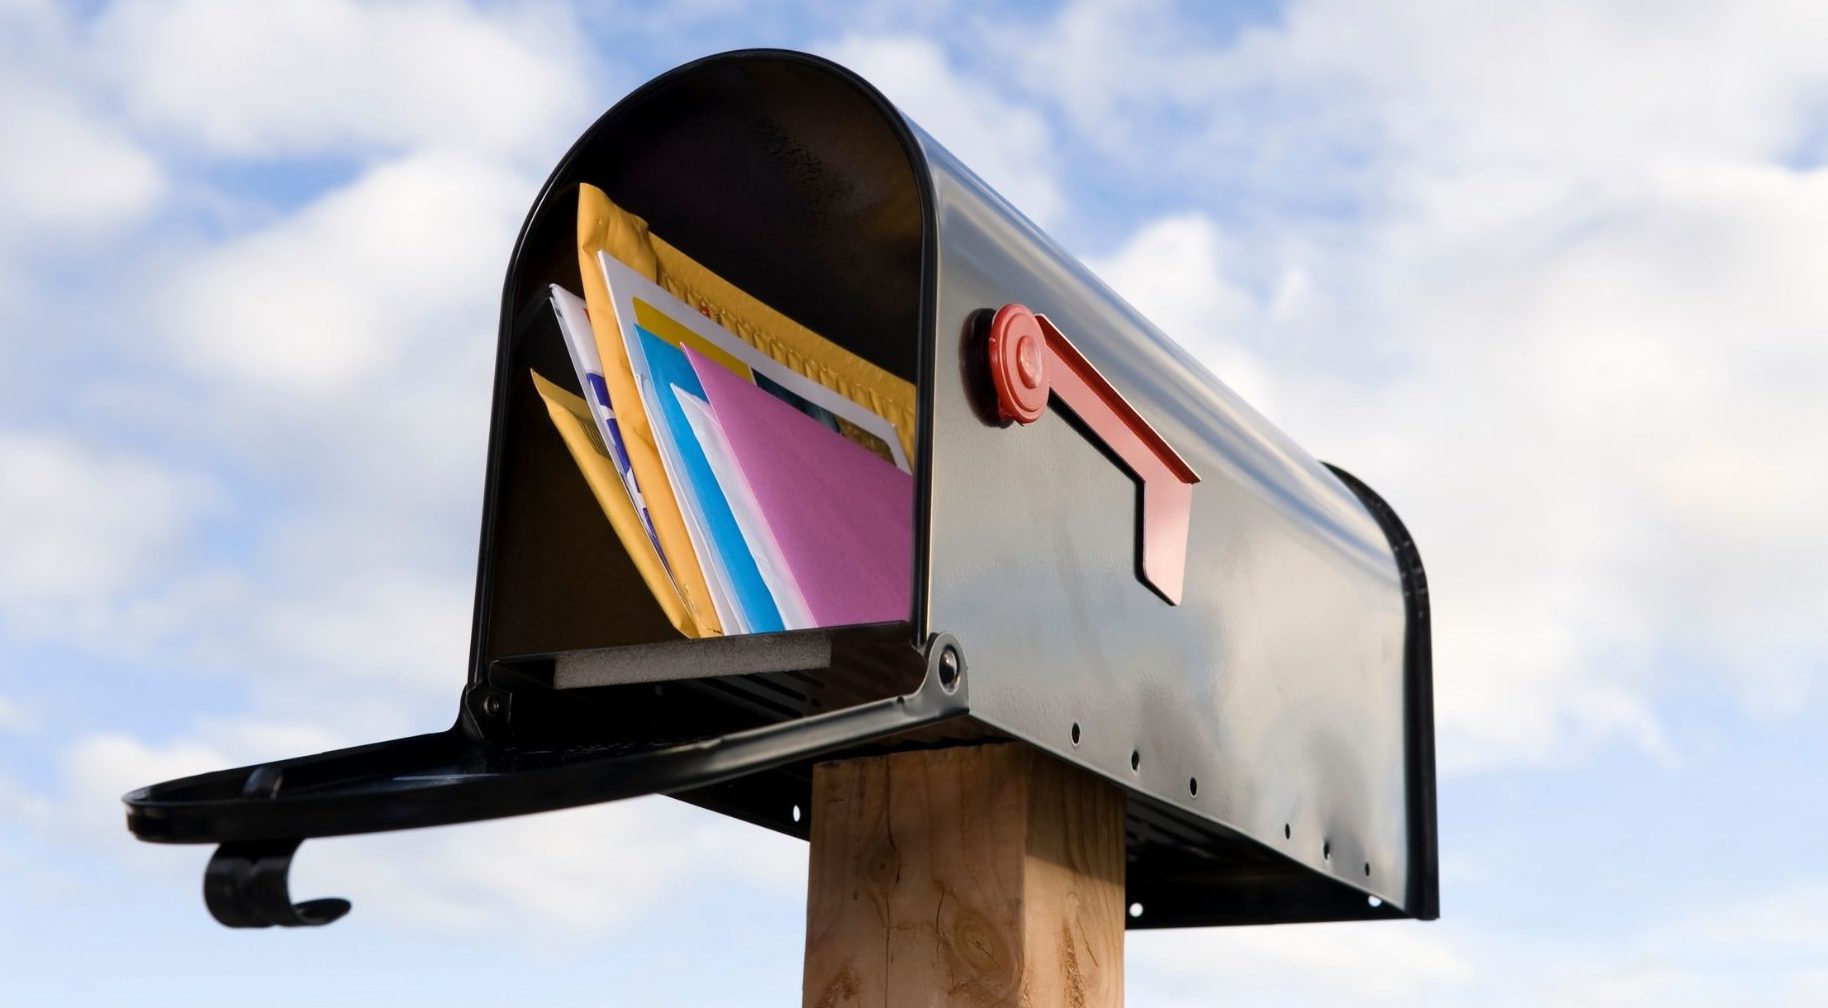 Global Direct Mail Advertising Market Growth Analysis And Indications – Includes Direct Mail Advertising Market Size